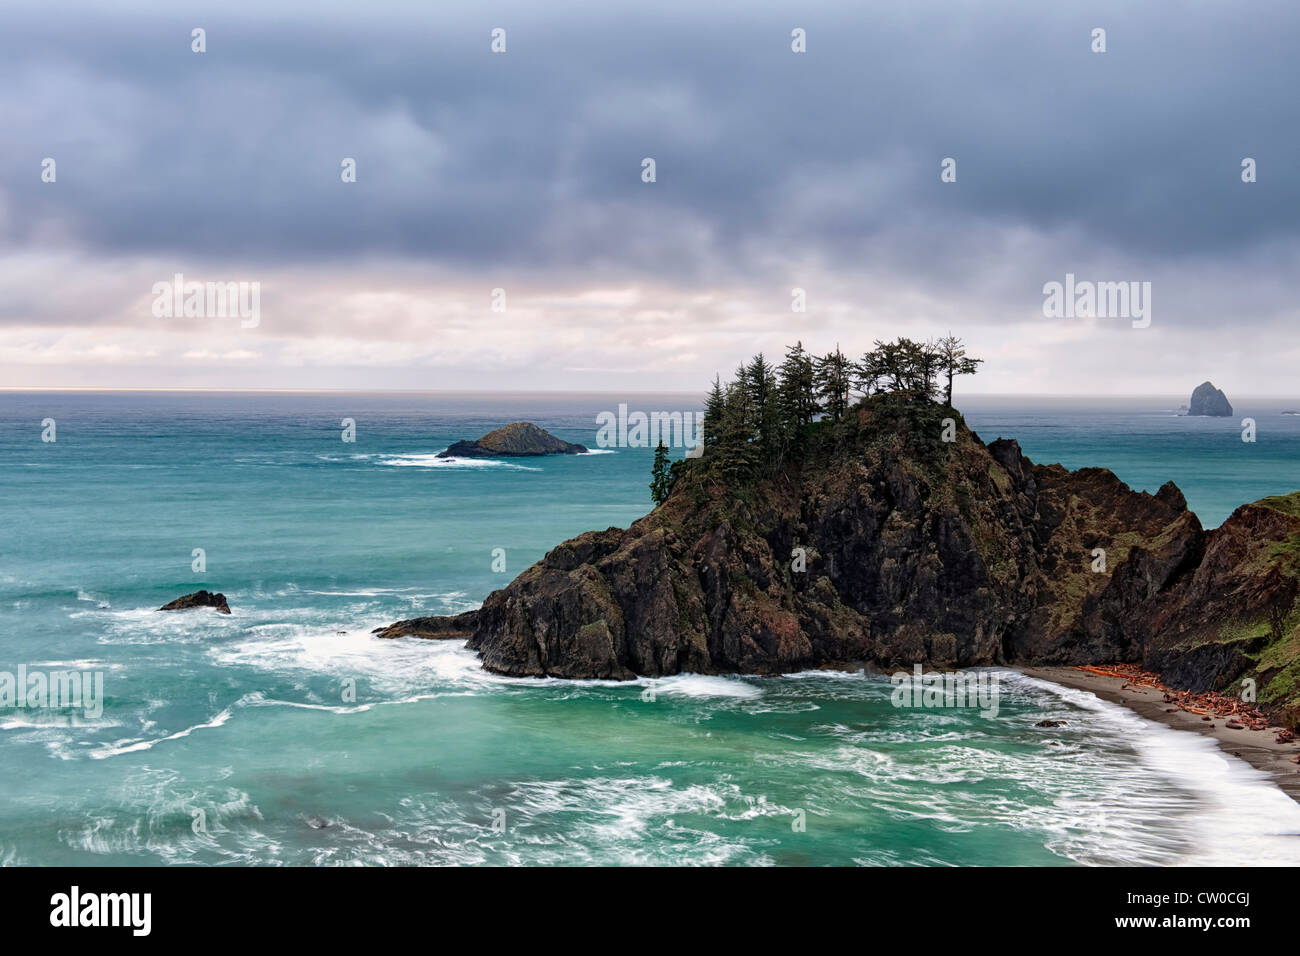 Evening storm clouds gather offshore at Oregon’s Boardman State Park and the south coast of Curry County. Stock Photo